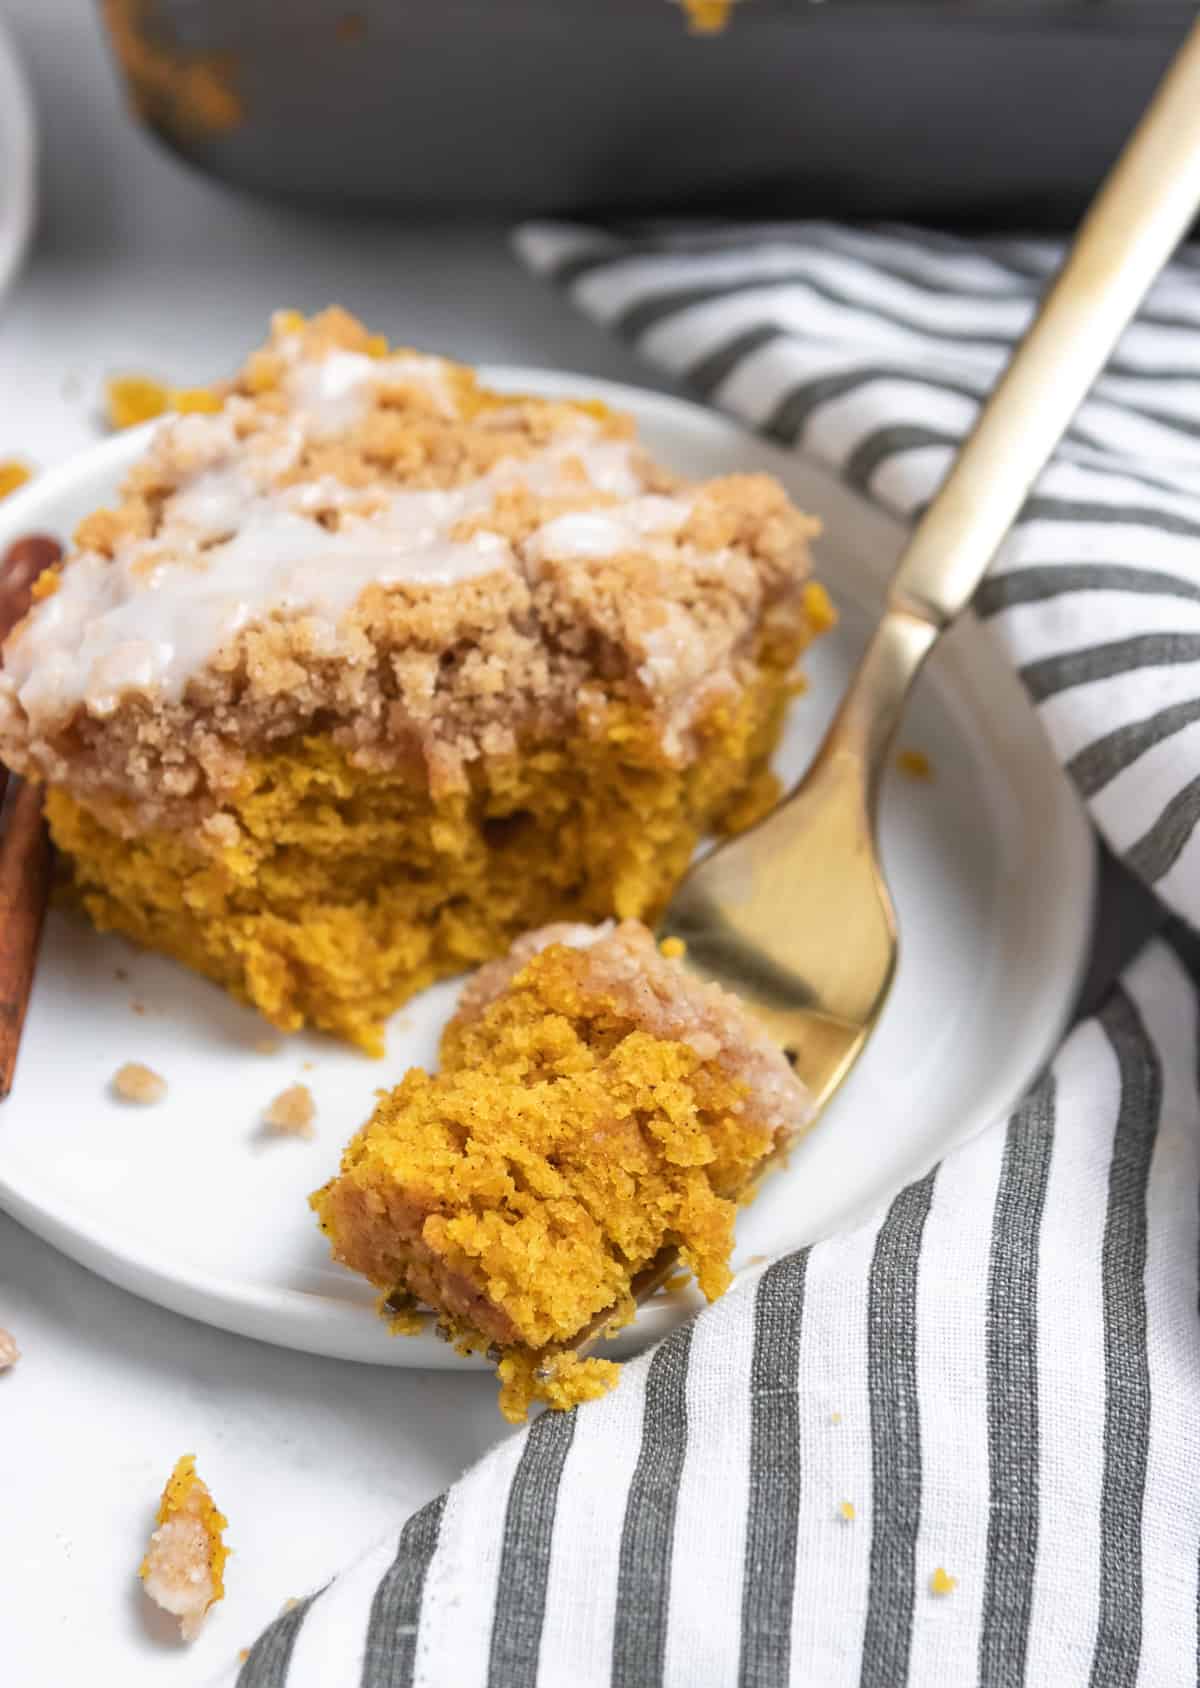 Forkful of pumpkin coffee cake on plate.